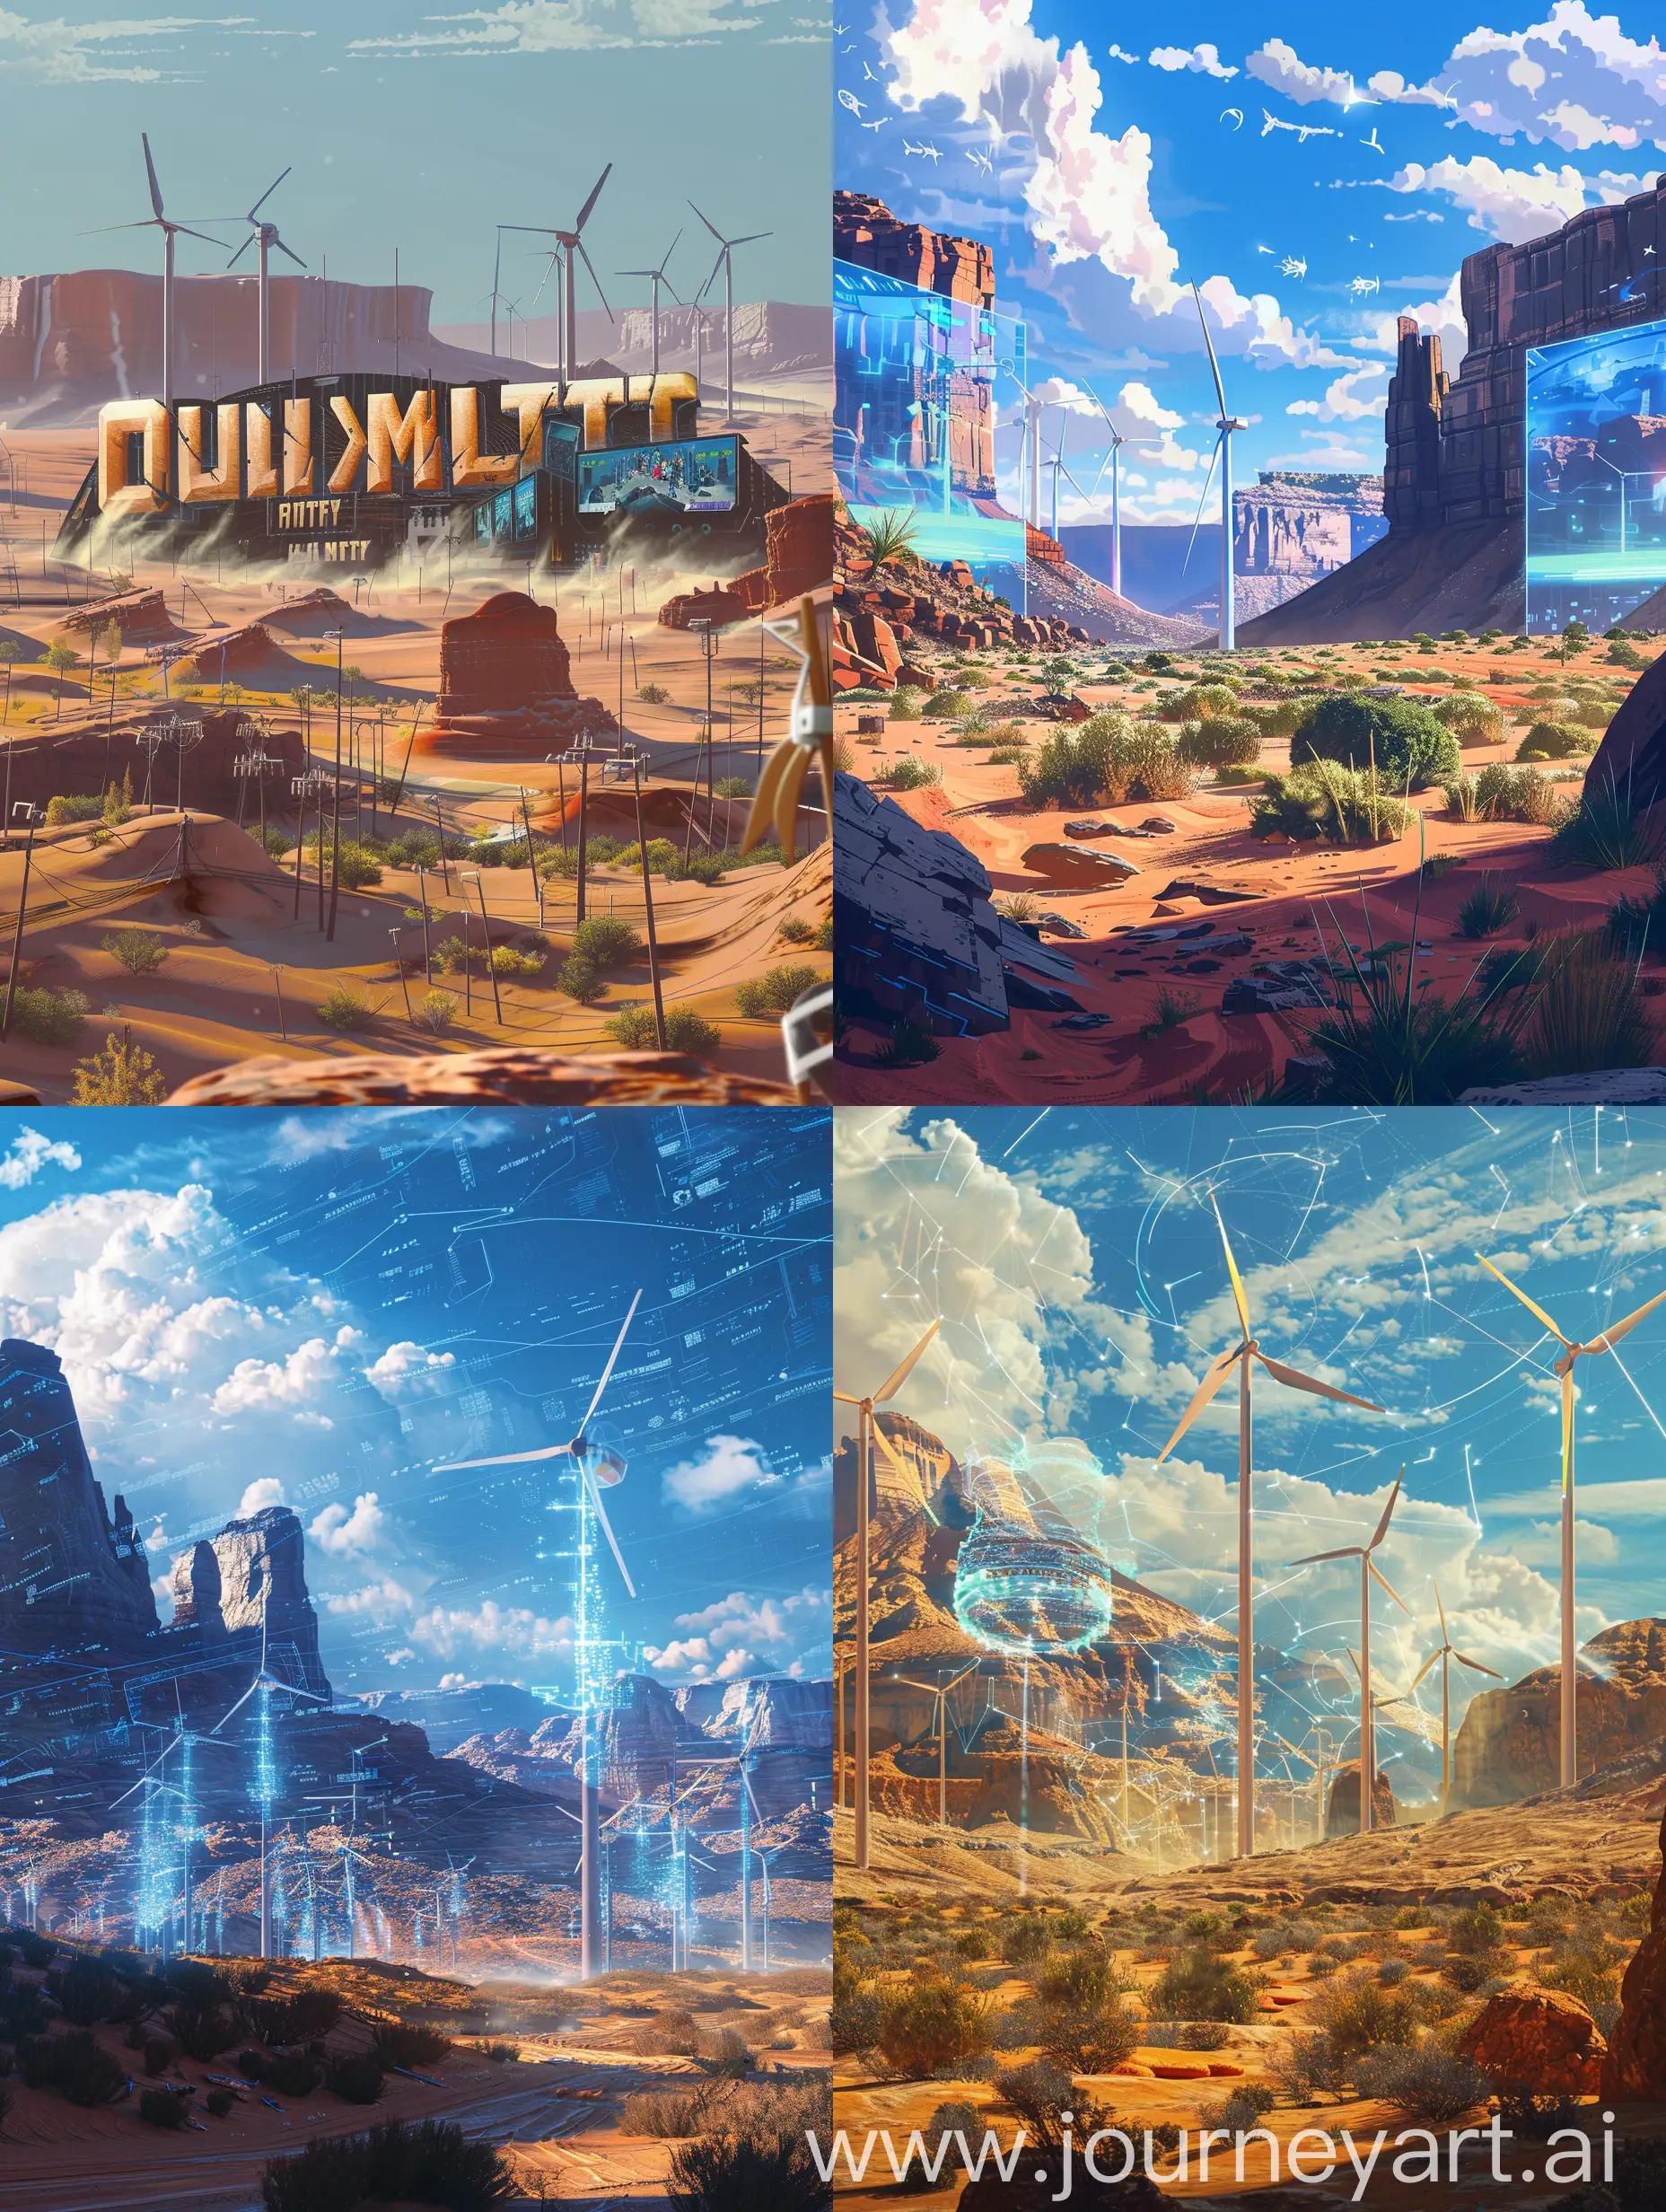 Futuristic-Digital-Wild-West-Landscape-with-Windmills-and-Holographic-Projections